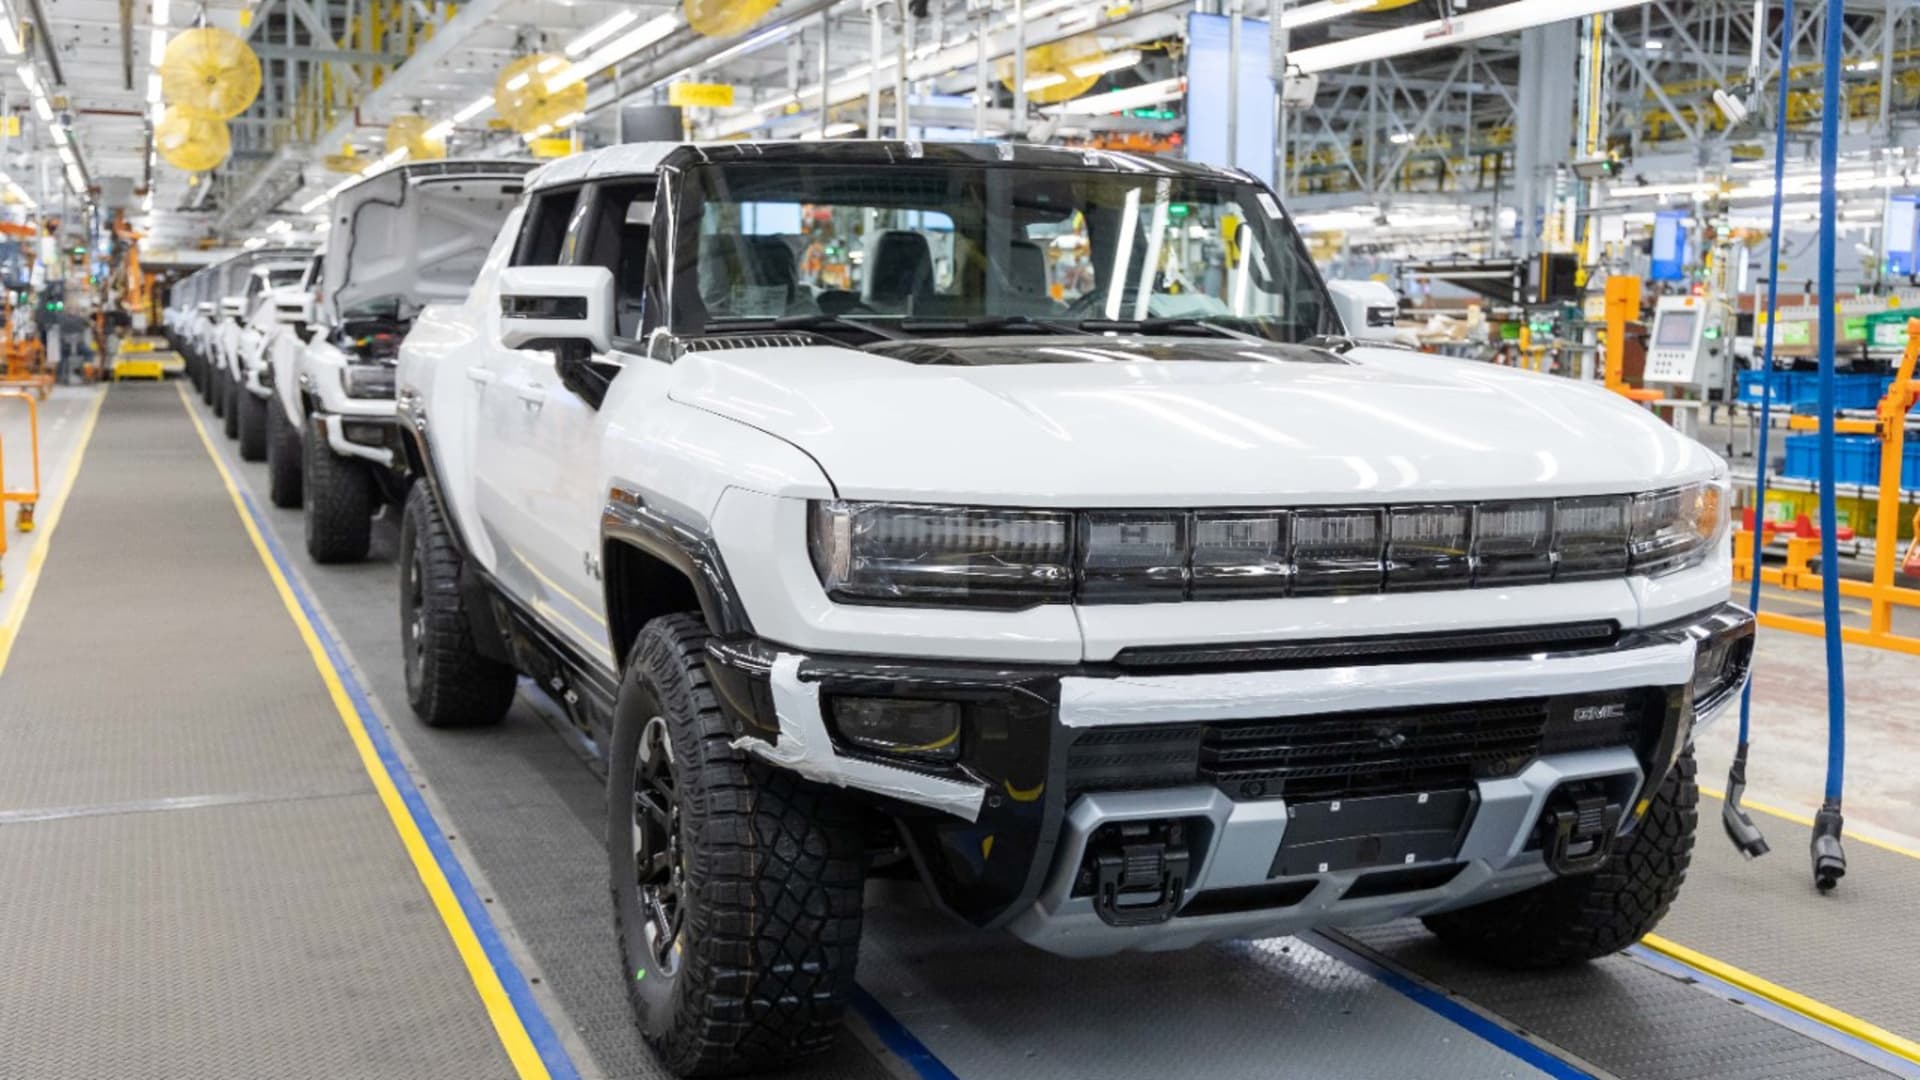 Production is now set to begin at the former Detroit-Hamtramck assembly plant, less than two years after GM announced the massive $2.2 billion investment to fully renovate the facility to build a variety of all-electric trucks and SUVs.